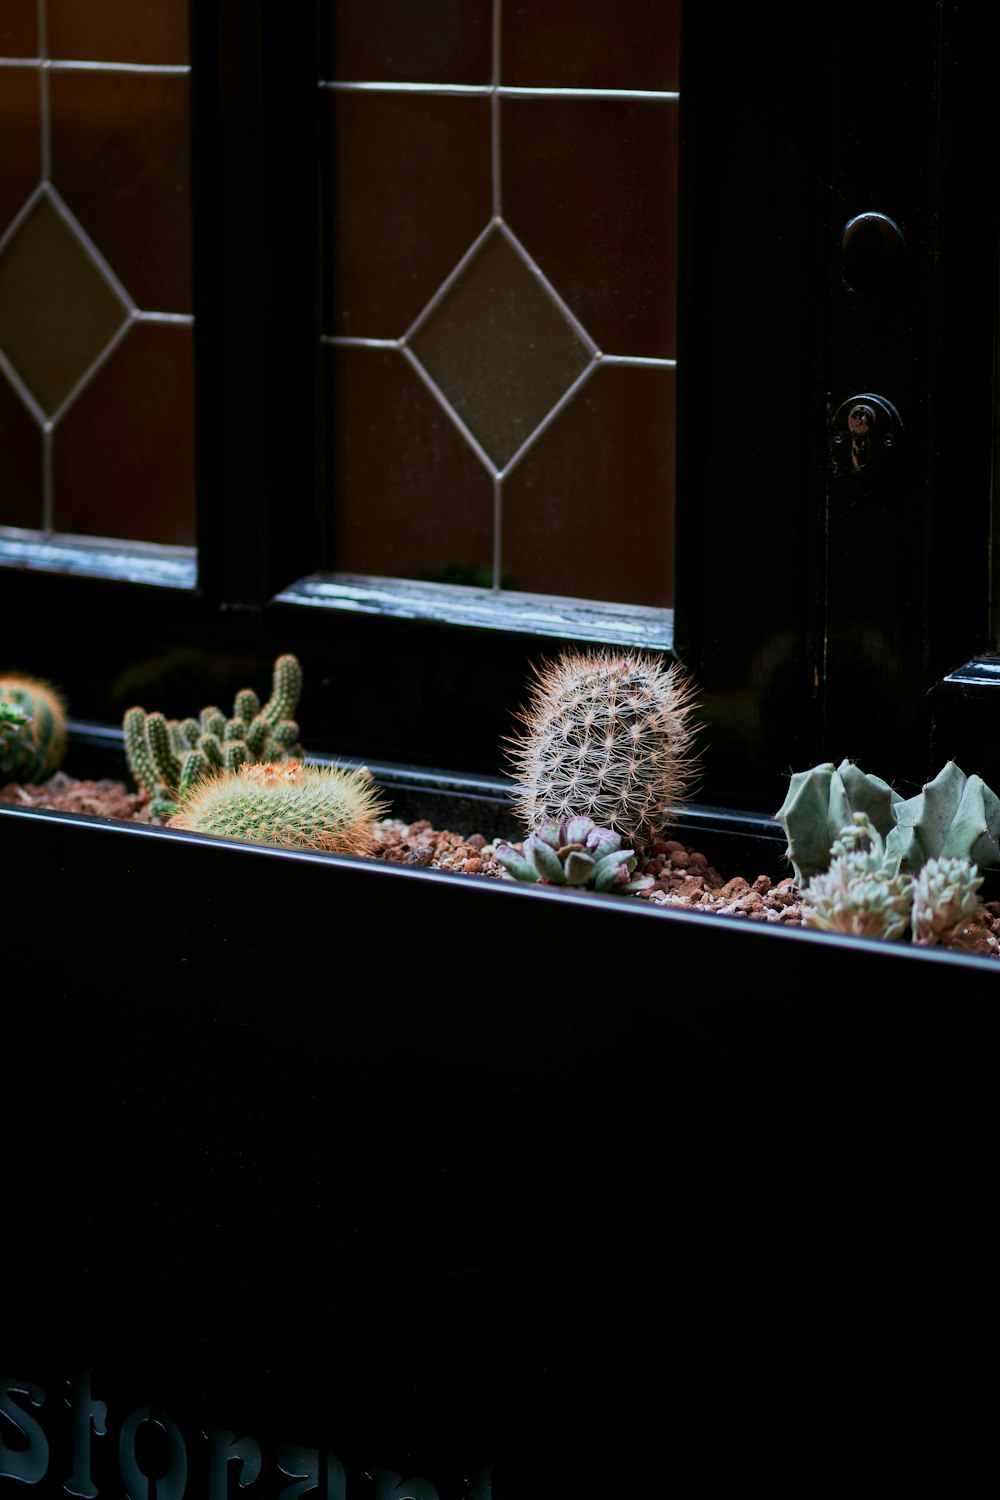 a group of cactus in a pot